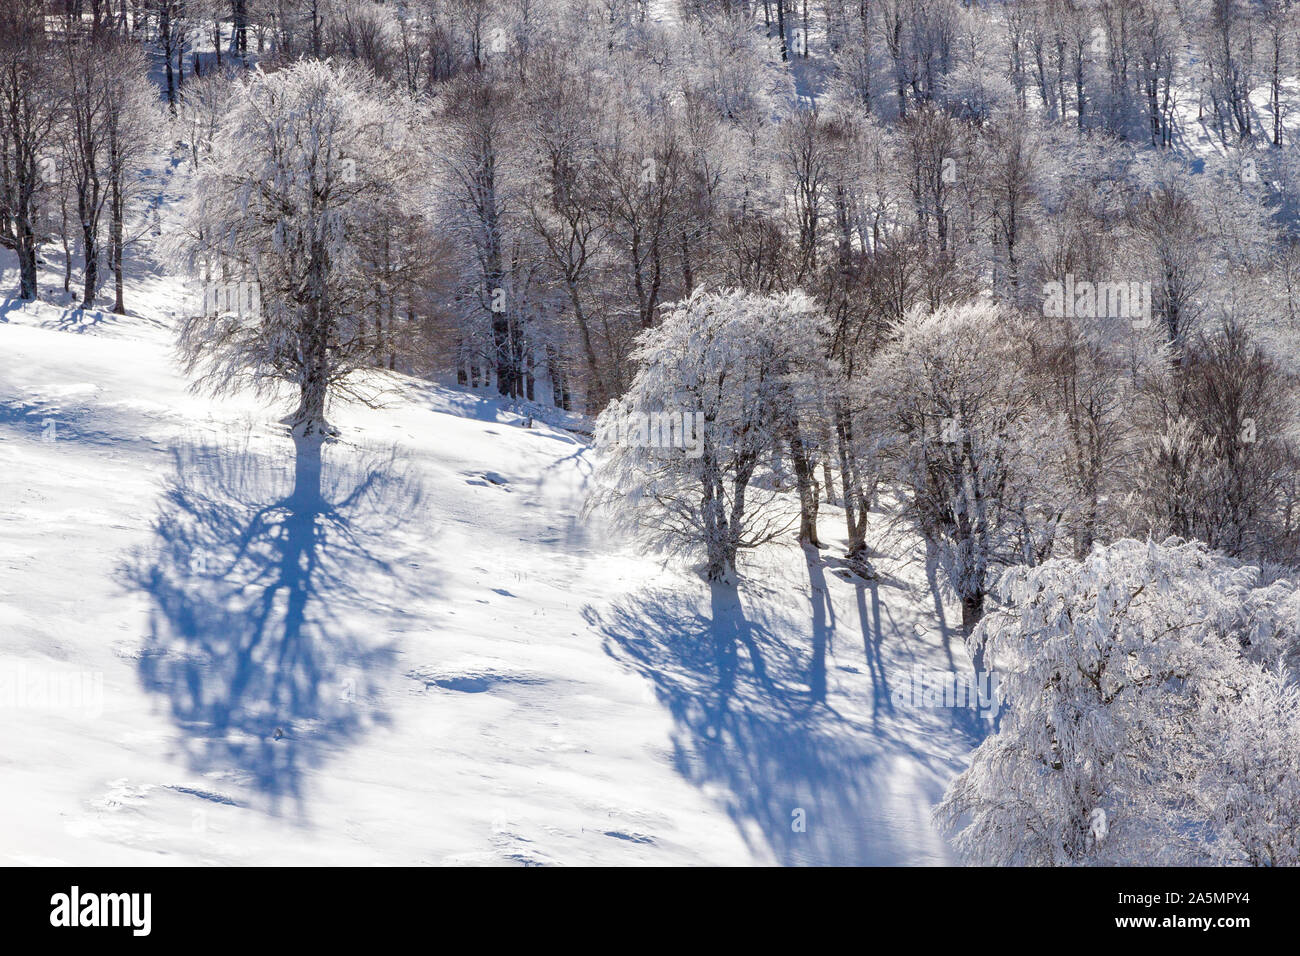 Greece, winter time full of snow in Grevena region, at the mountrains of Pindos, near villages of Smixi, Vasilitsa and Samarina. Stock Photo